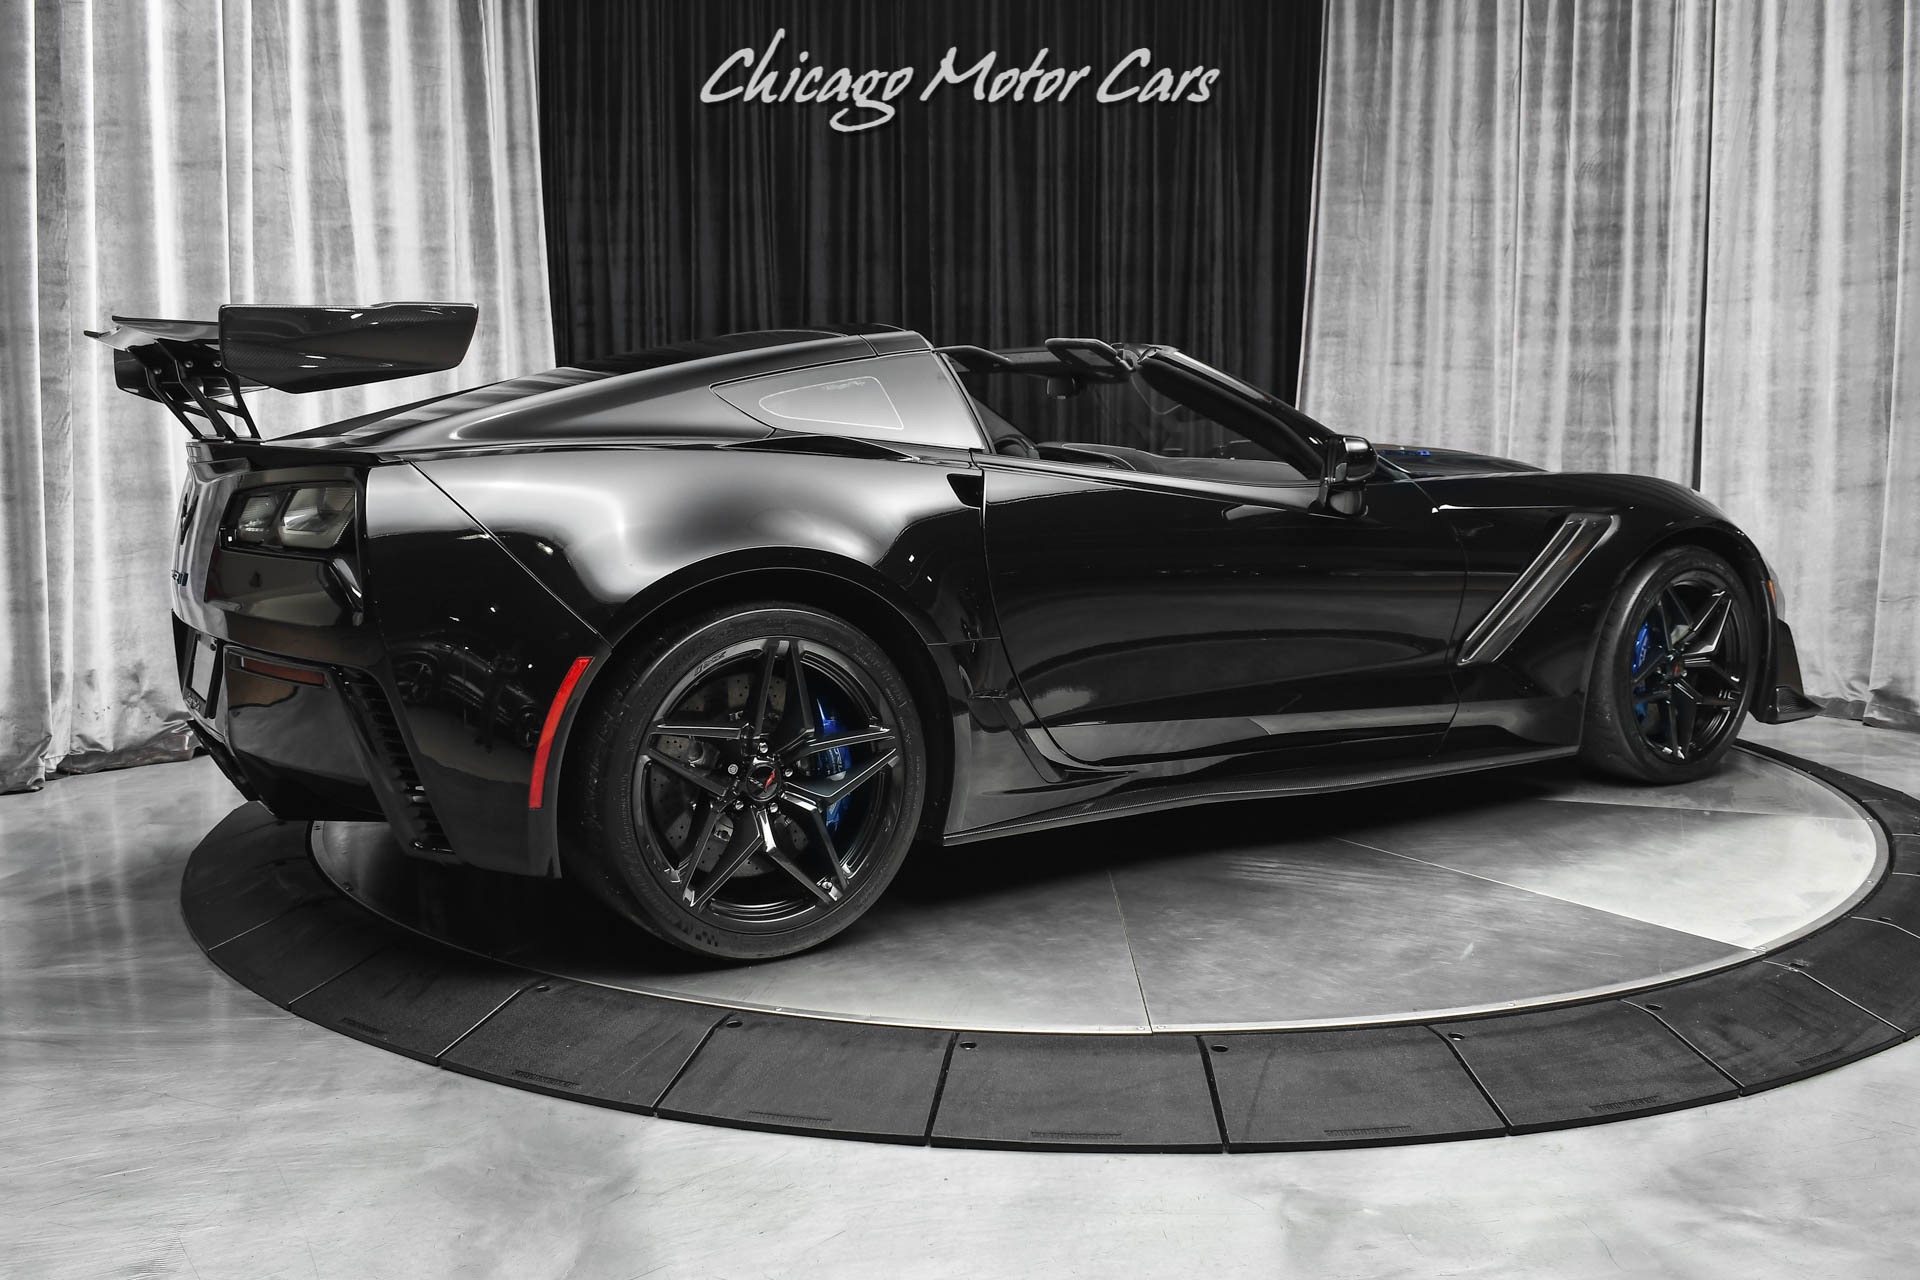 Used-2019-Chevrolet-Corvette-ZR1-3ZR-877-RWHP-Coupe-Manual-Transmission-ONLY-2k-Miles